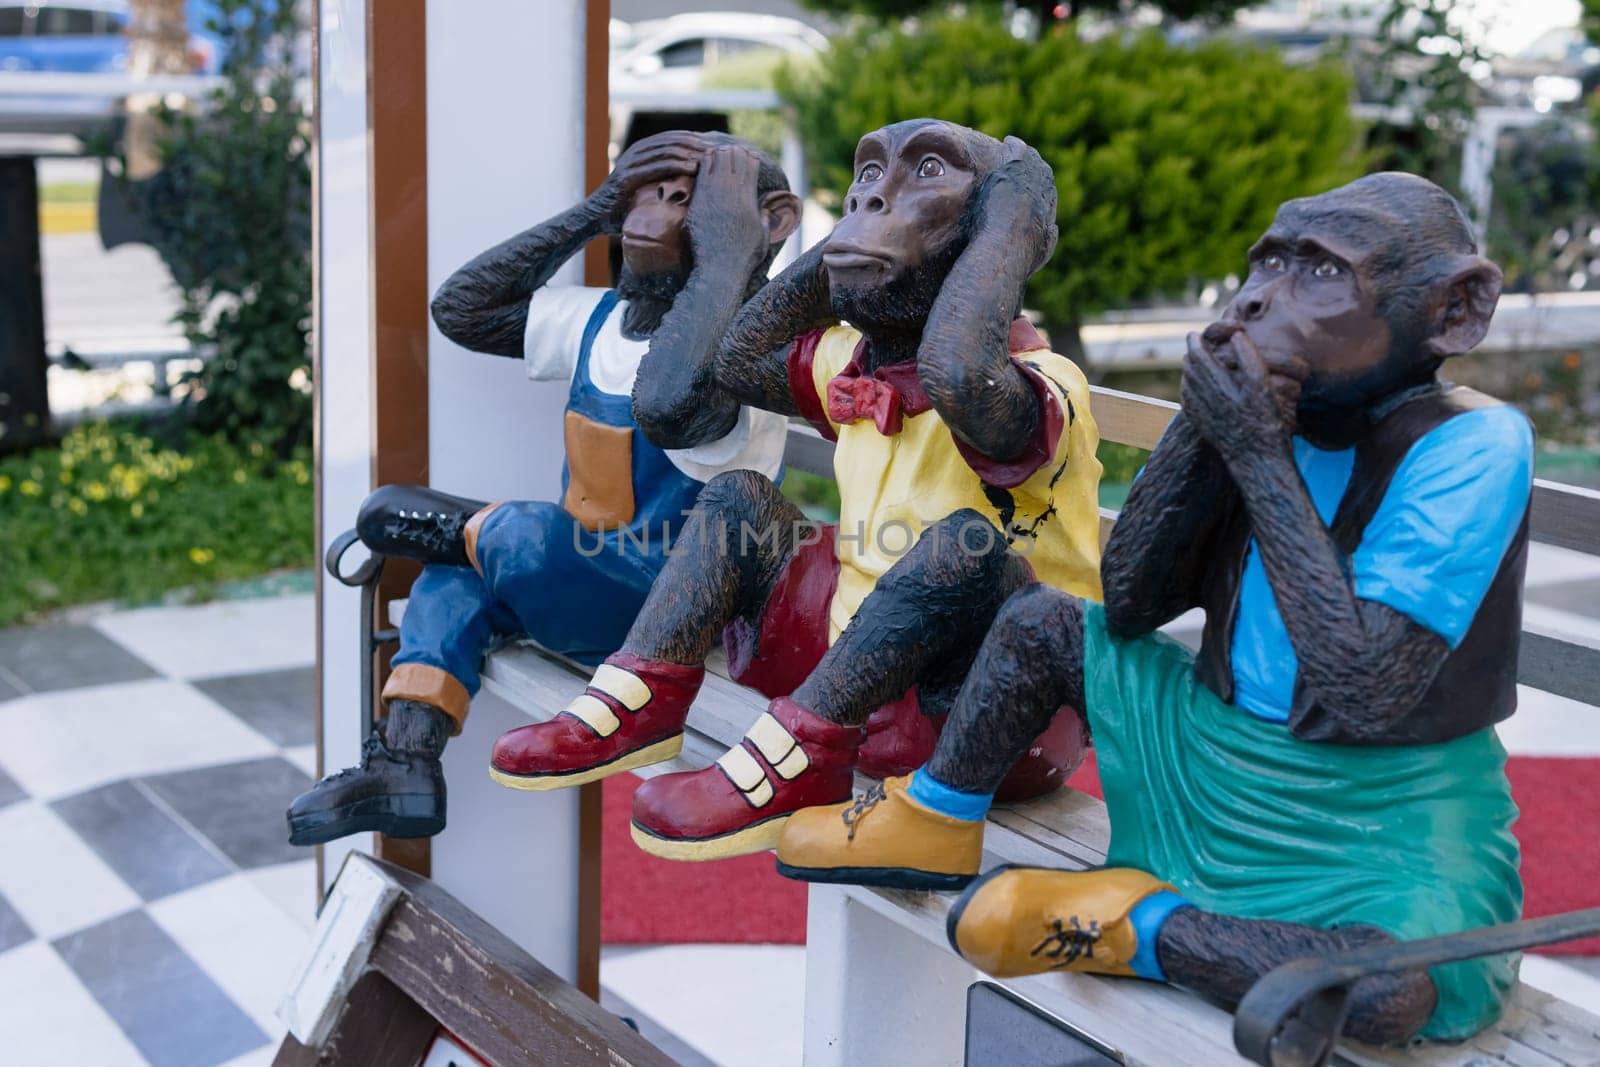 figurines of three monkeys, creative figurines from the designer by PopOff